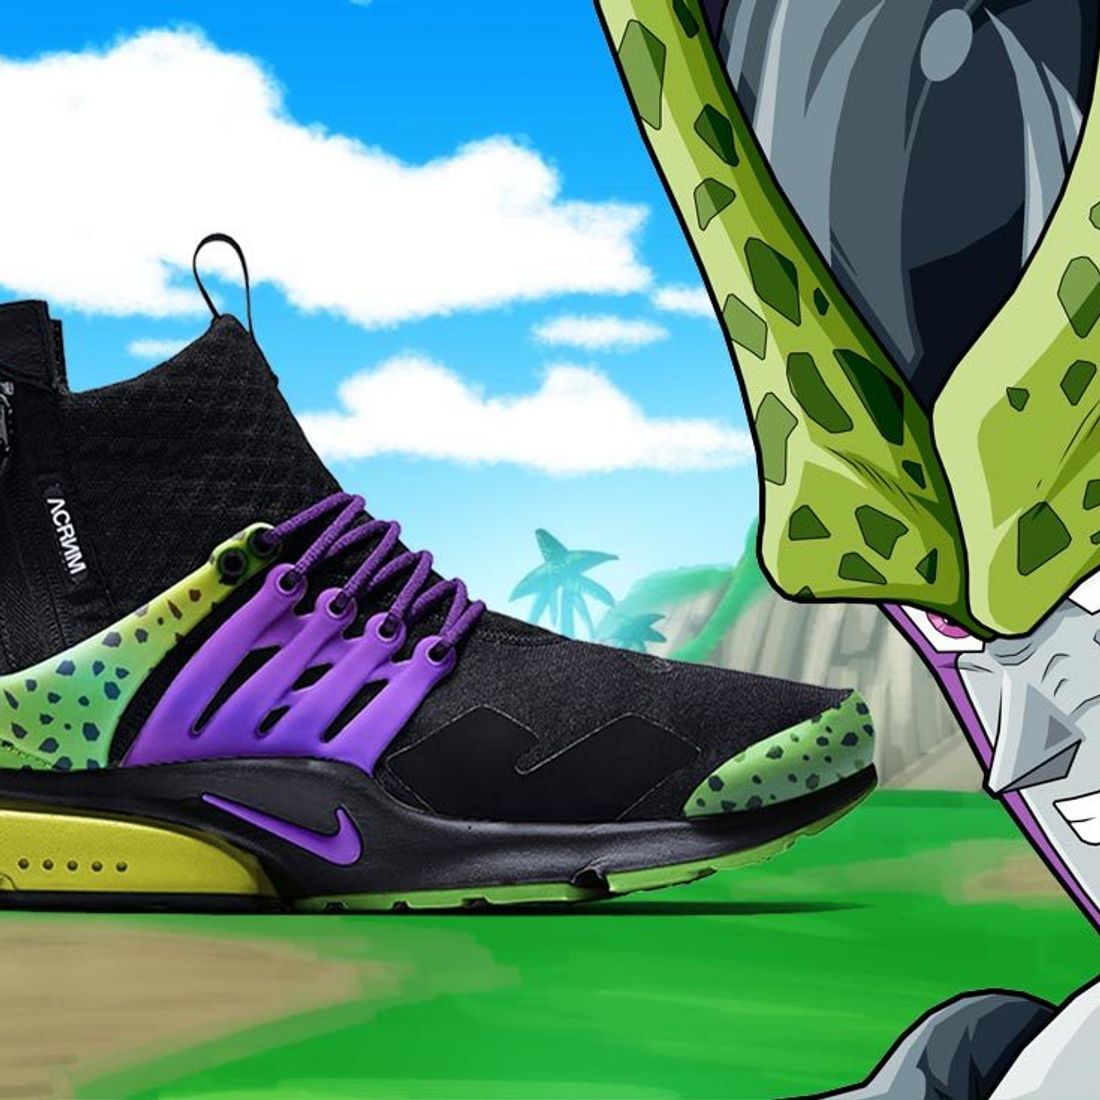 Check Out These Stunning Dragon Ball Z x Nike Concepts - Sneaker Freaker